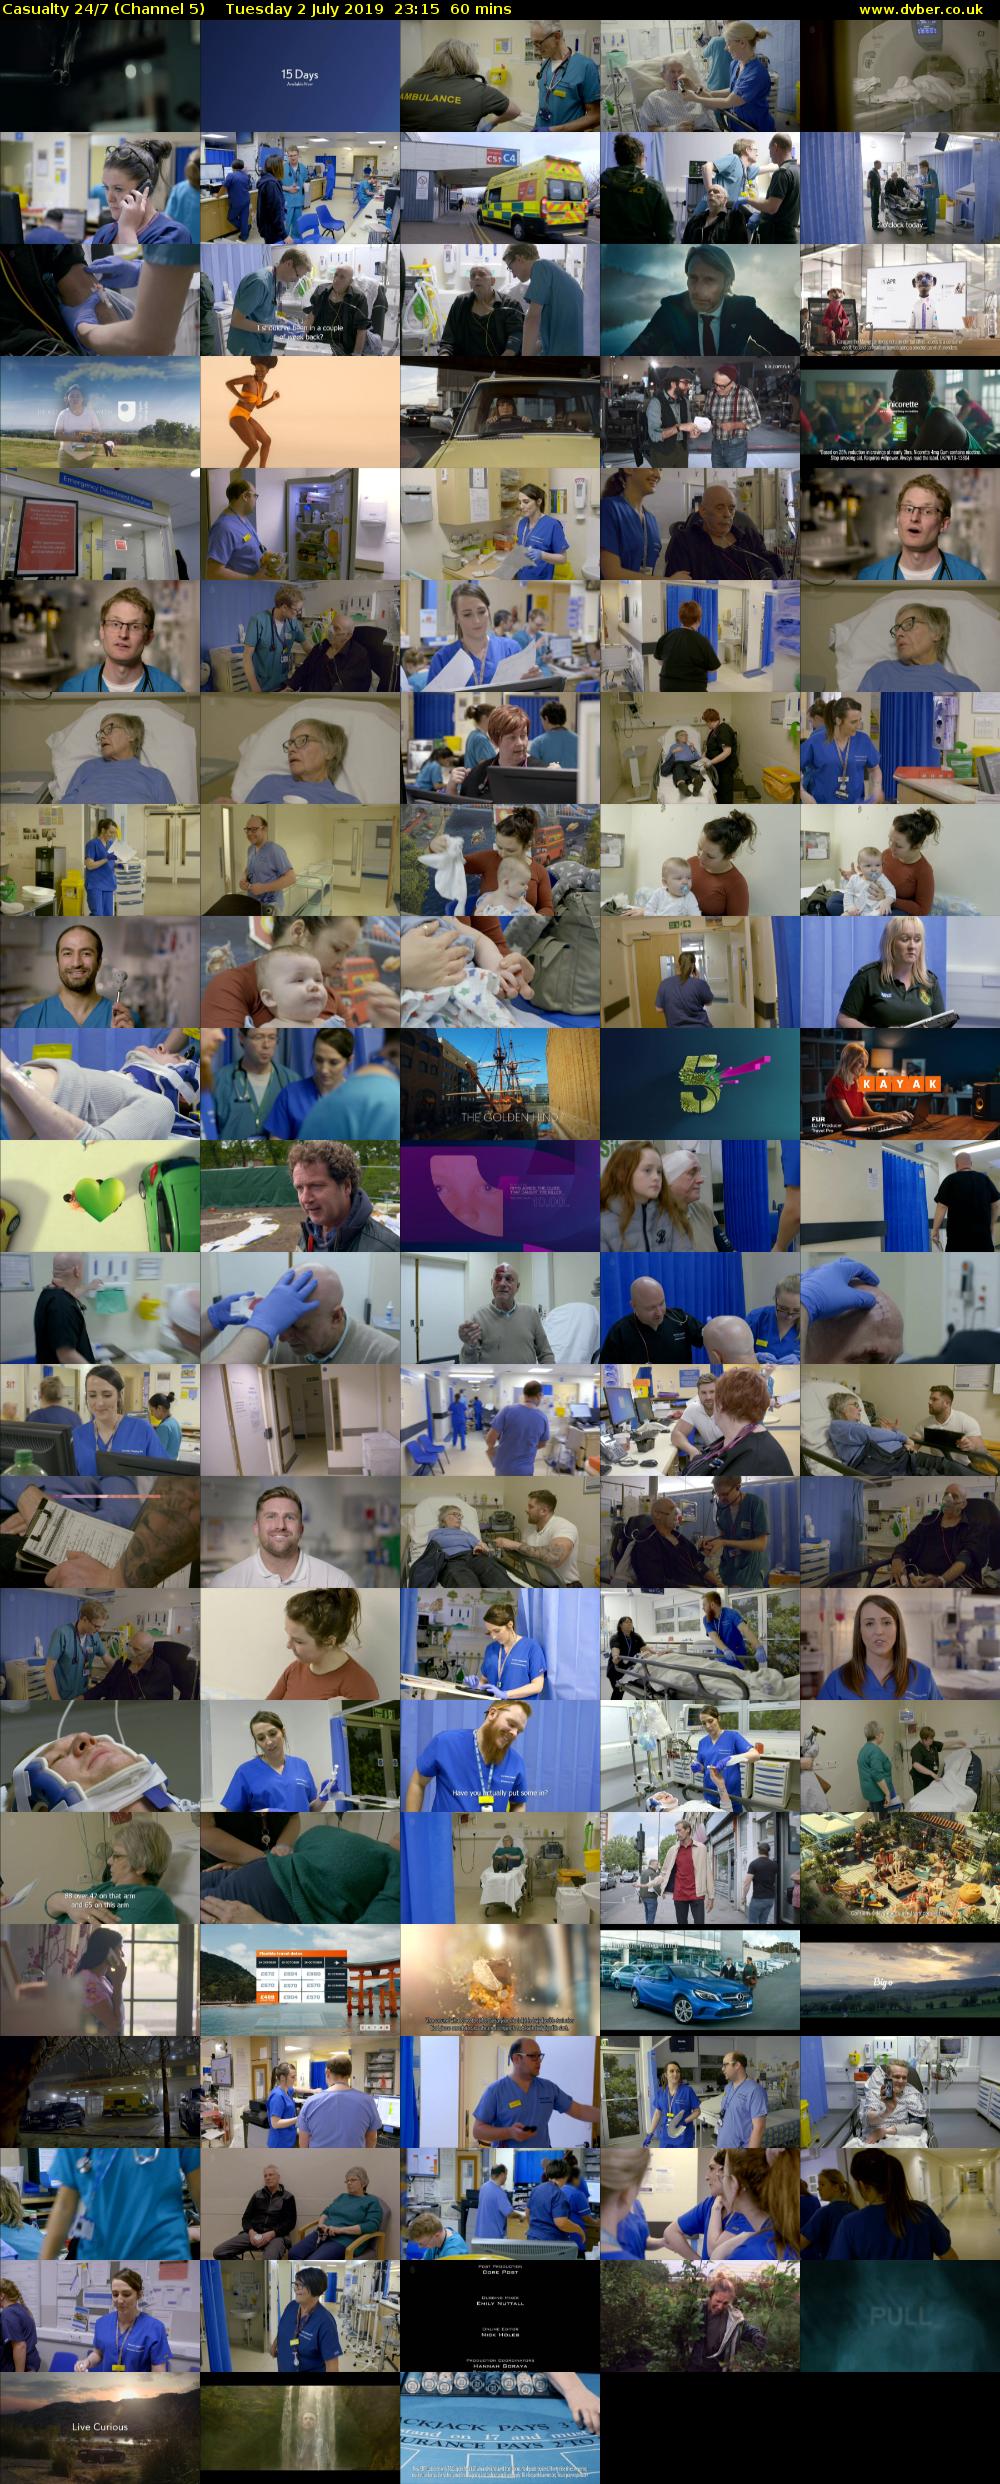 Casualty 24/7 (Channel 5) Tuesday 2 July 2019 23:15 - 00:15